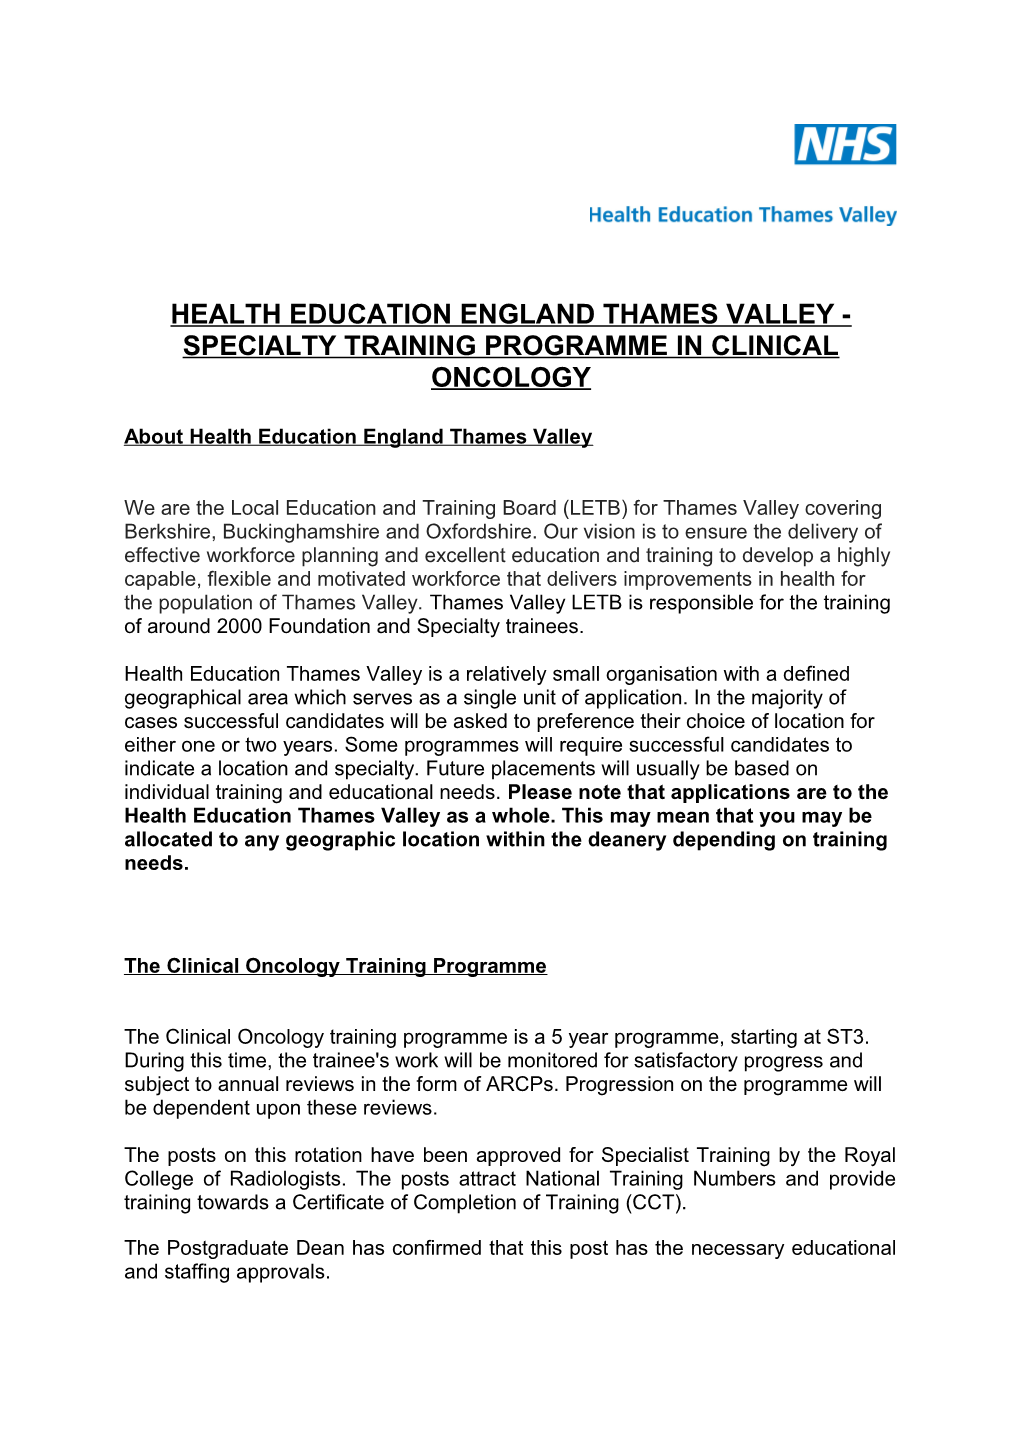 Health Education England Thames Valley - Specialty Training Programme in Clinical Oncology